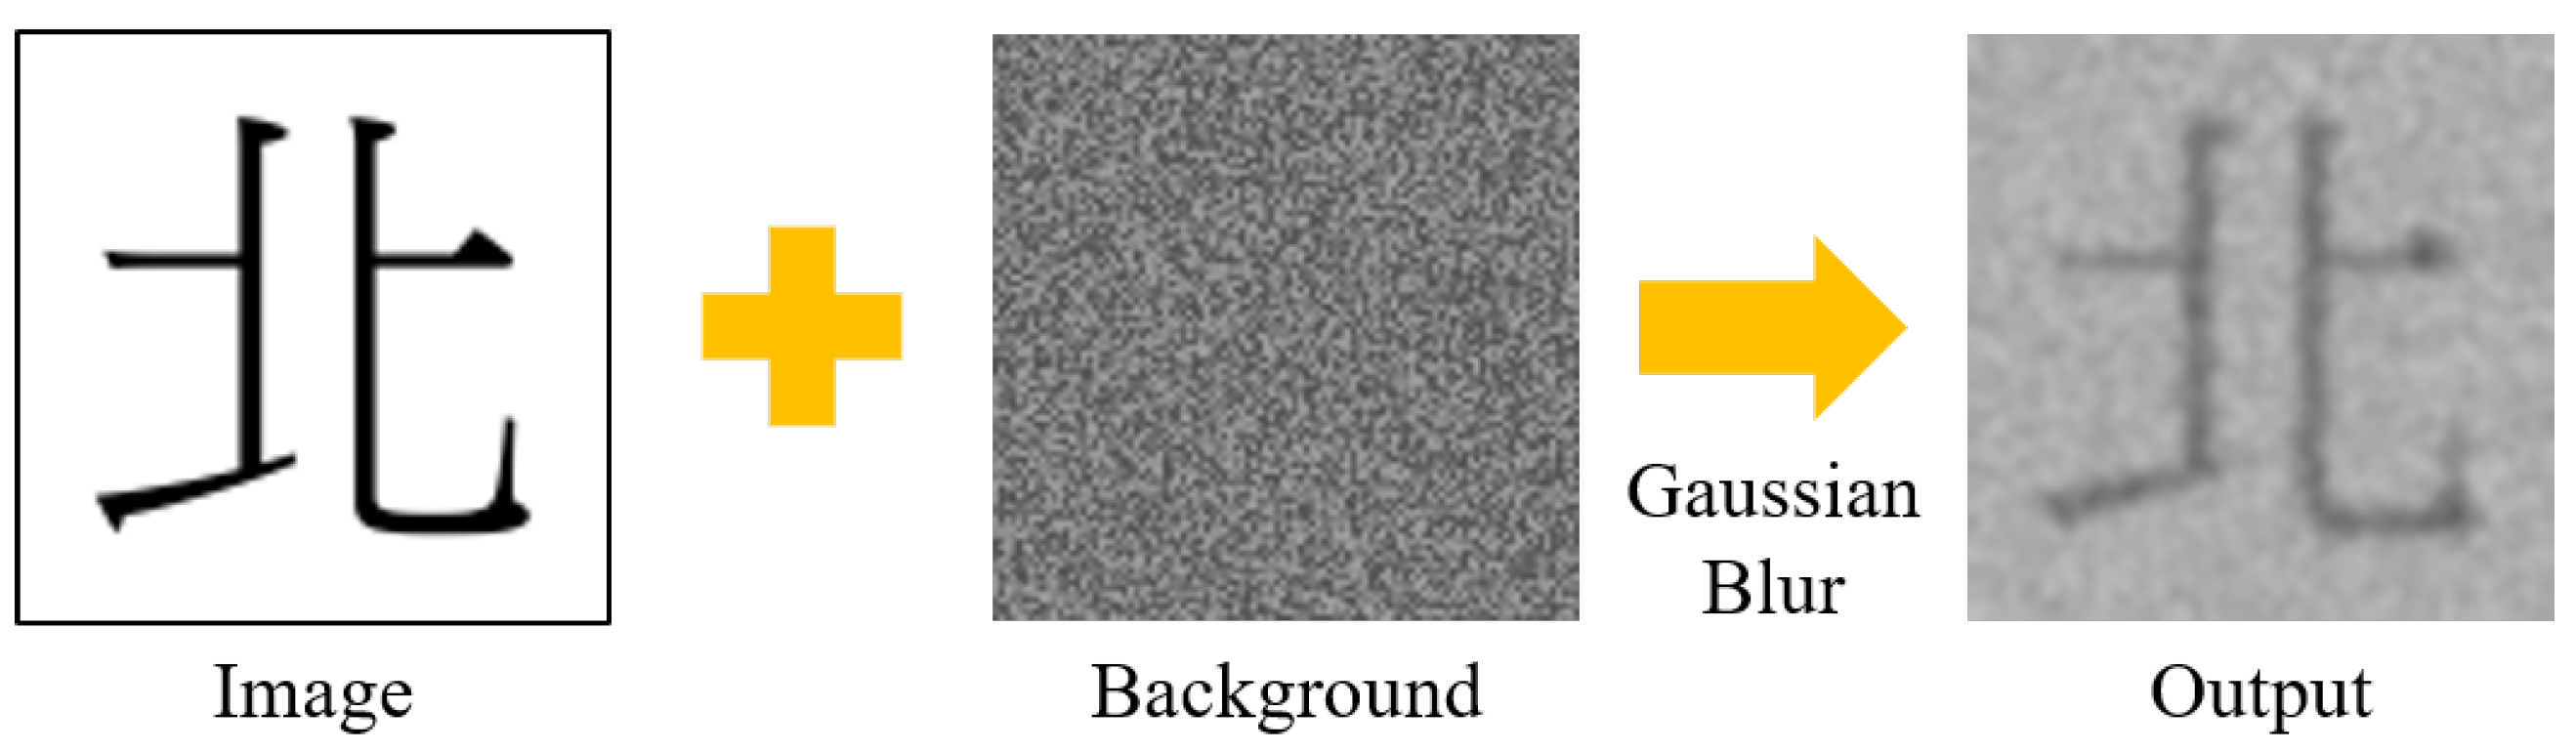 How to get background blur using Deep Learning?